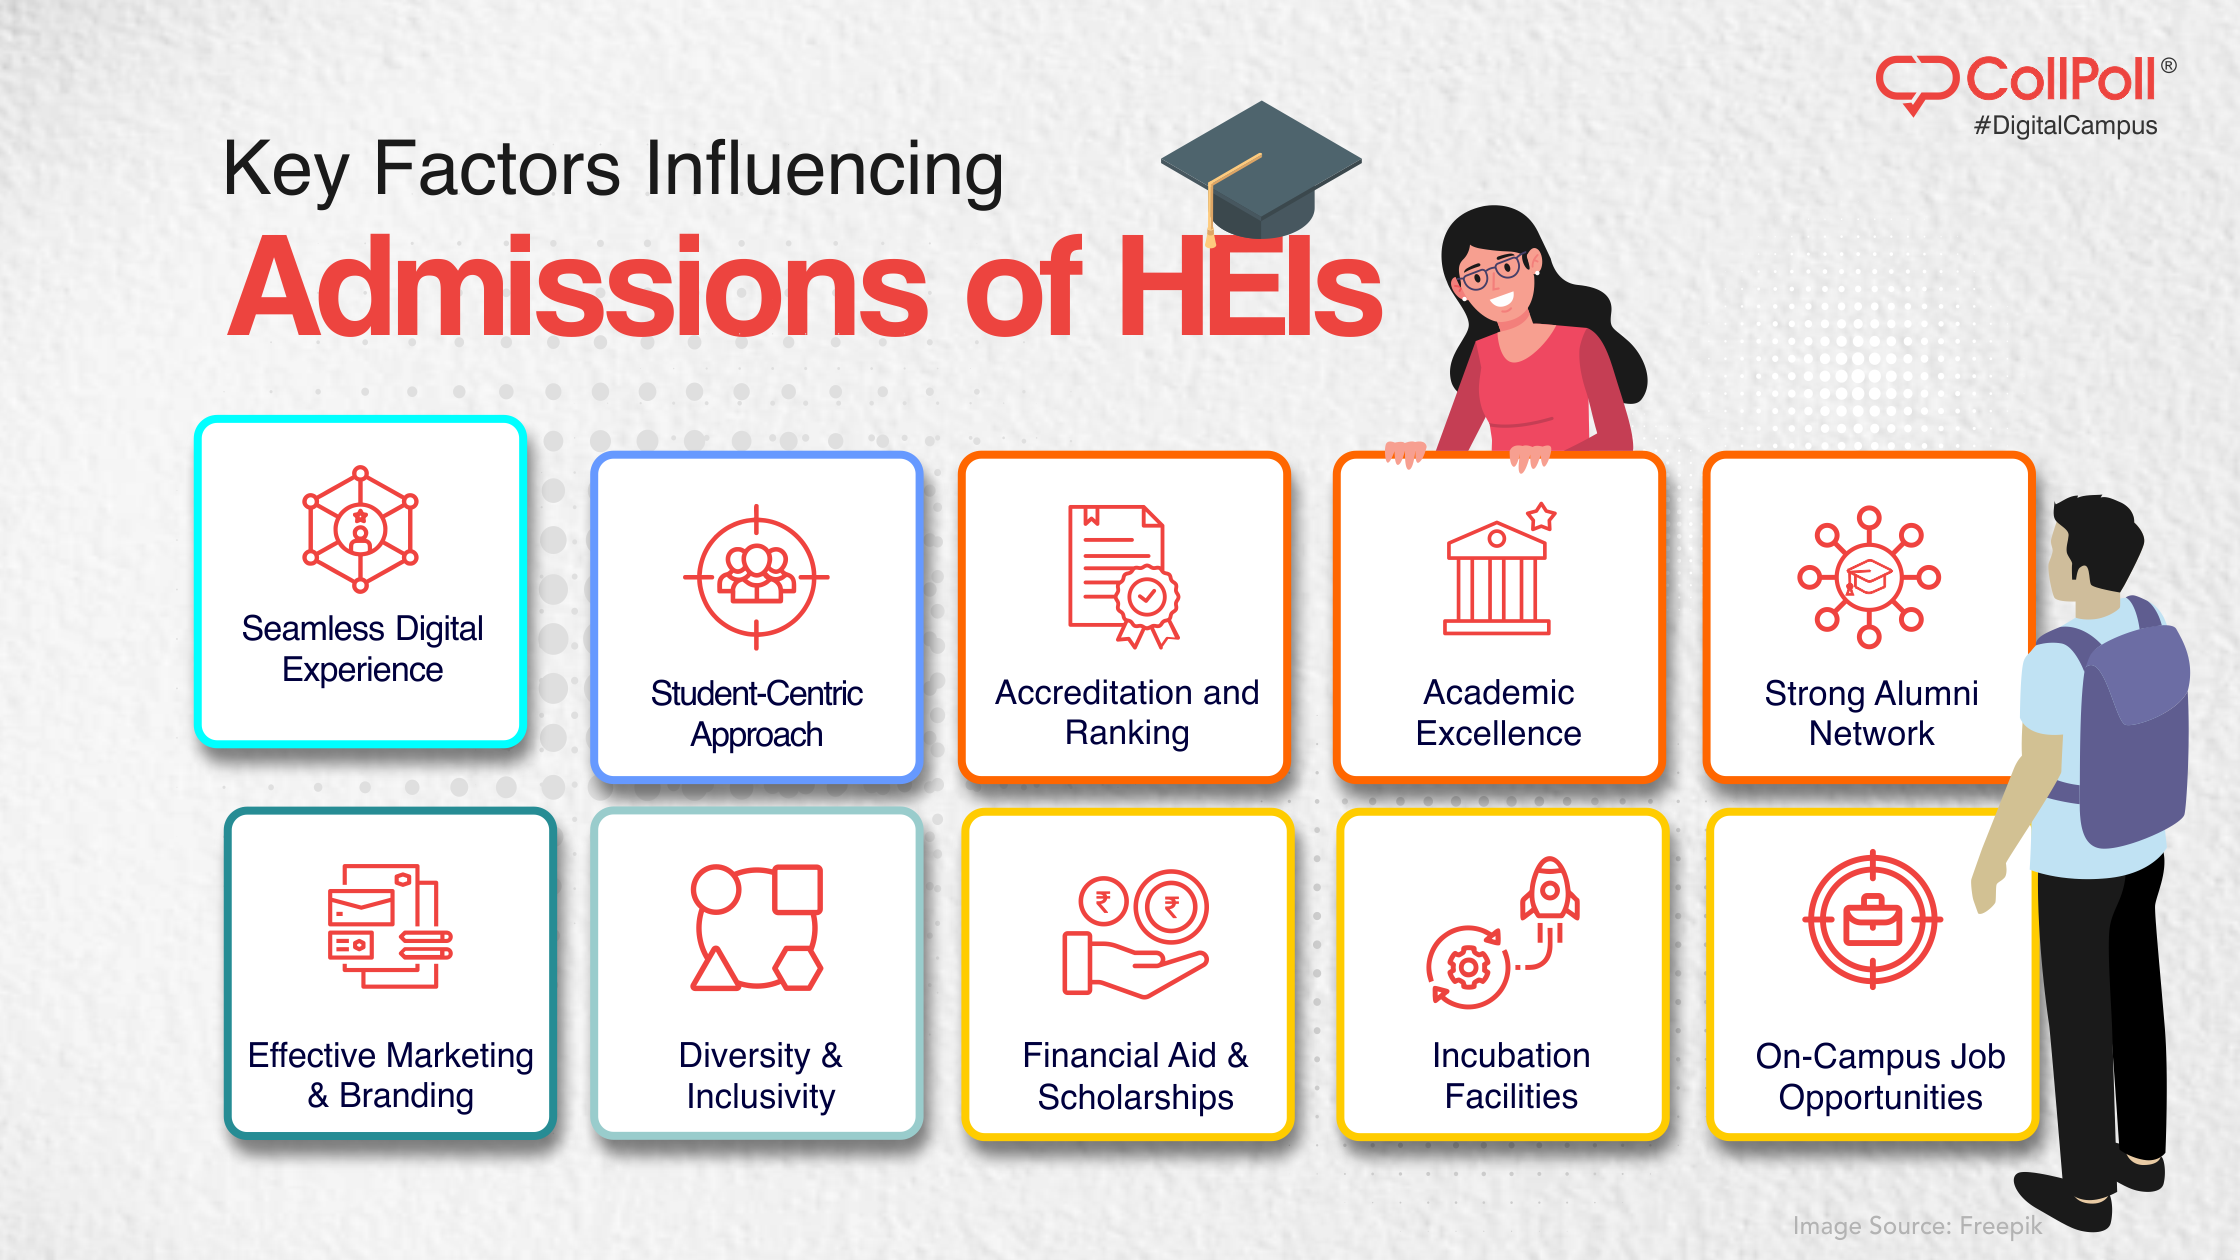 10 Factors That Influence High-Quality Admissions in HEIs